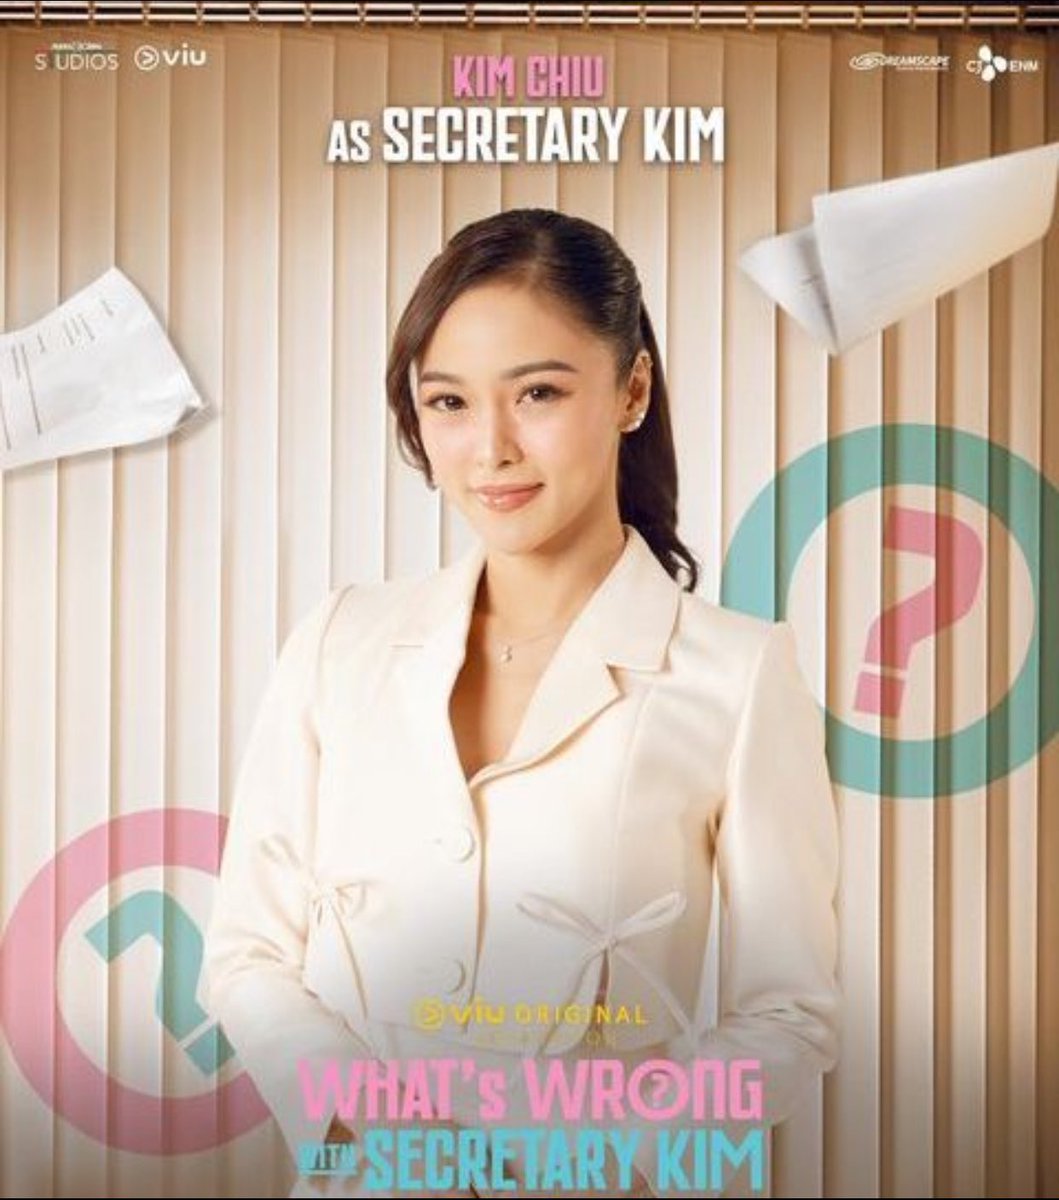 Wow! First Time in PH Showbiz: 
Kim Chiu’s DOMINATION & 
SUPREMACY on Nat’l TV at its FINEST 
Mondays thru Sundays not ONCE but TWICE in a day:
Lunchtime via @itsShowtimeNa @ASAPOfficial 
Evenings via PrimeTime Bida #LinlangTheTeleseryeVersion & #WhatsWrongWithSecretaryKimPH